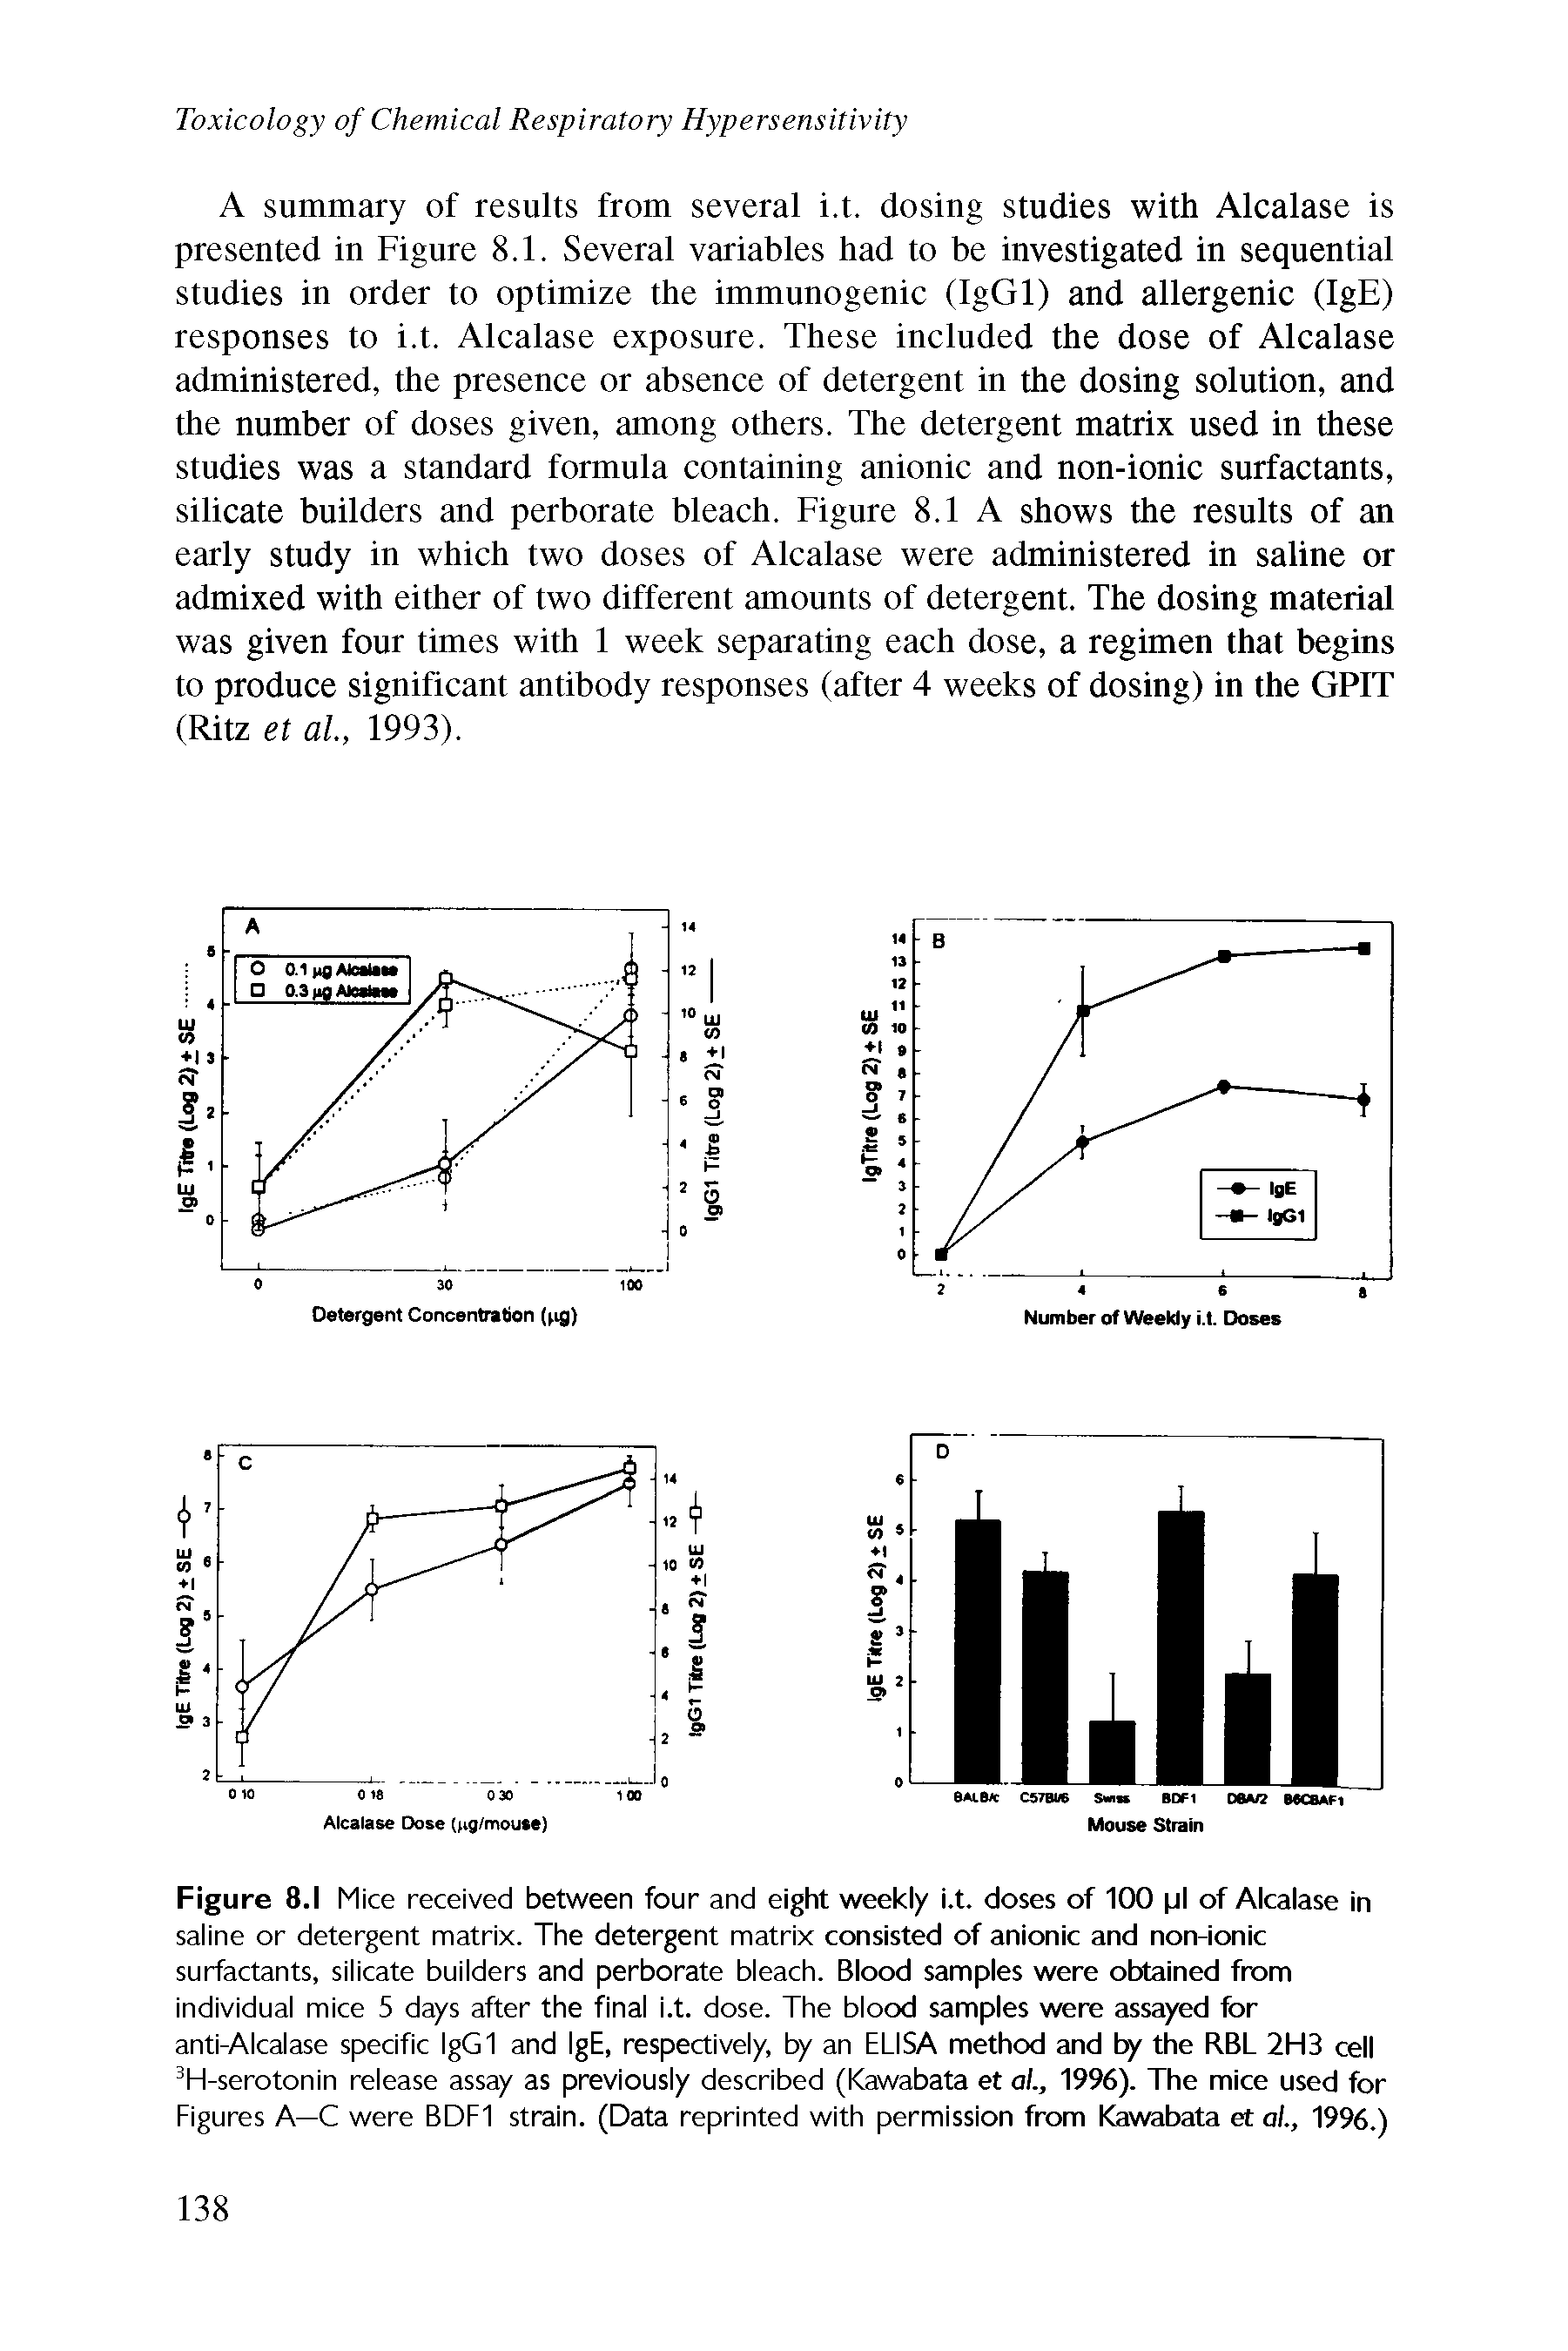 Figure 8.1 Mice received between four and eight weekly i.t. doses of 100 jl of Alcalase in saline or detergent matrix. The detergent matrix consisted of anionic and non-ionic surfactants, silicate builders and perborate bleach. Blood samples were obtained from individual mice 5 days after the final i.t. dose. The blood samples were assayed for anti-Alcalase specific IgG 1 and IgE, respectively, by an ELISA method and by the RBL 2H3 cell 3H-serotonin release assay as previously described (Kawabata et al., 1996). The mice used for Figures A—C were BDF1 strain. (Data reprinted with permission from Kawabata et al., 1996.)...